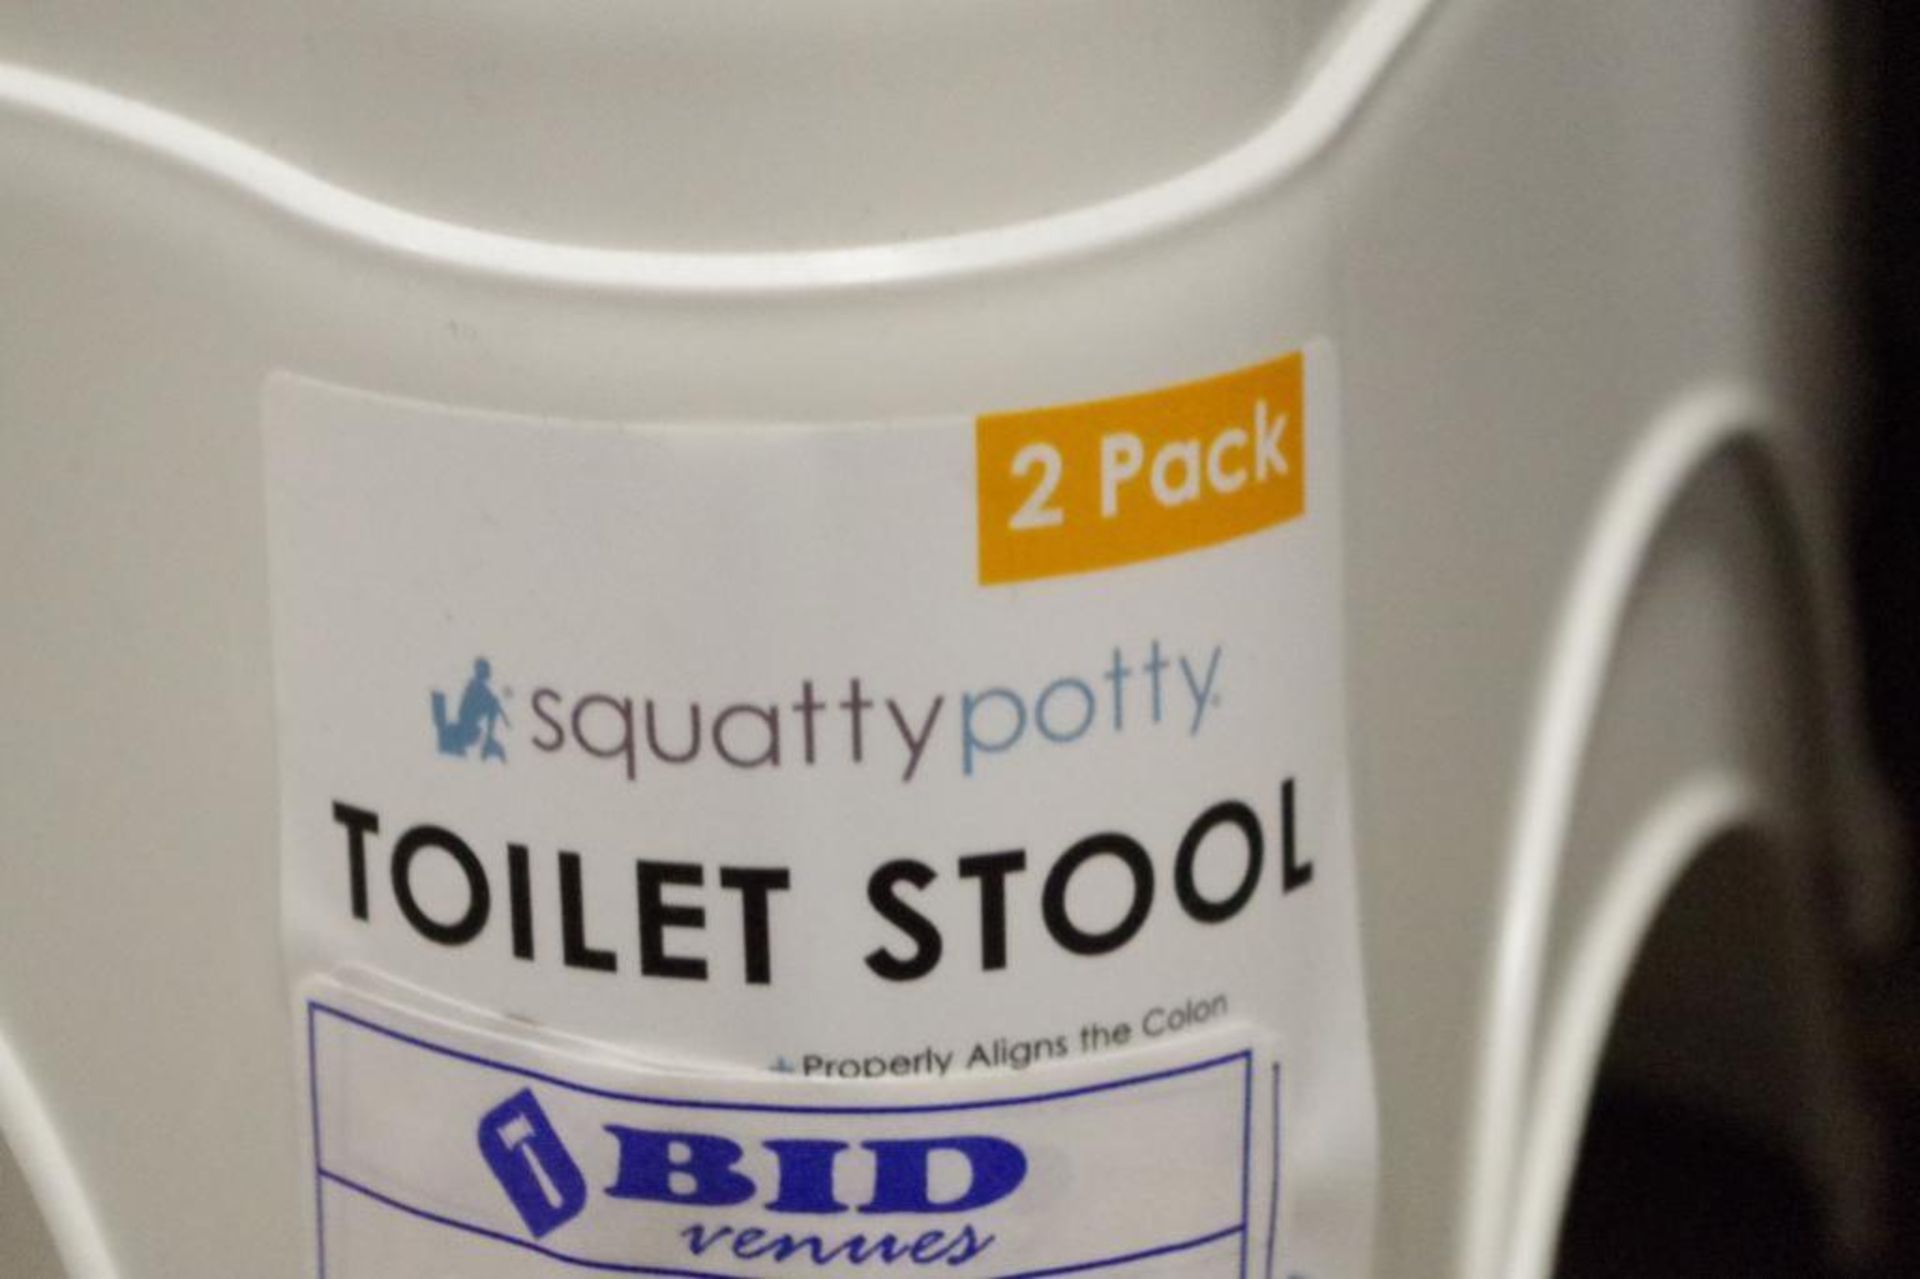 [2] SQUATTY POTTY Toilet Stool, Made in USA - Image 2 of 3